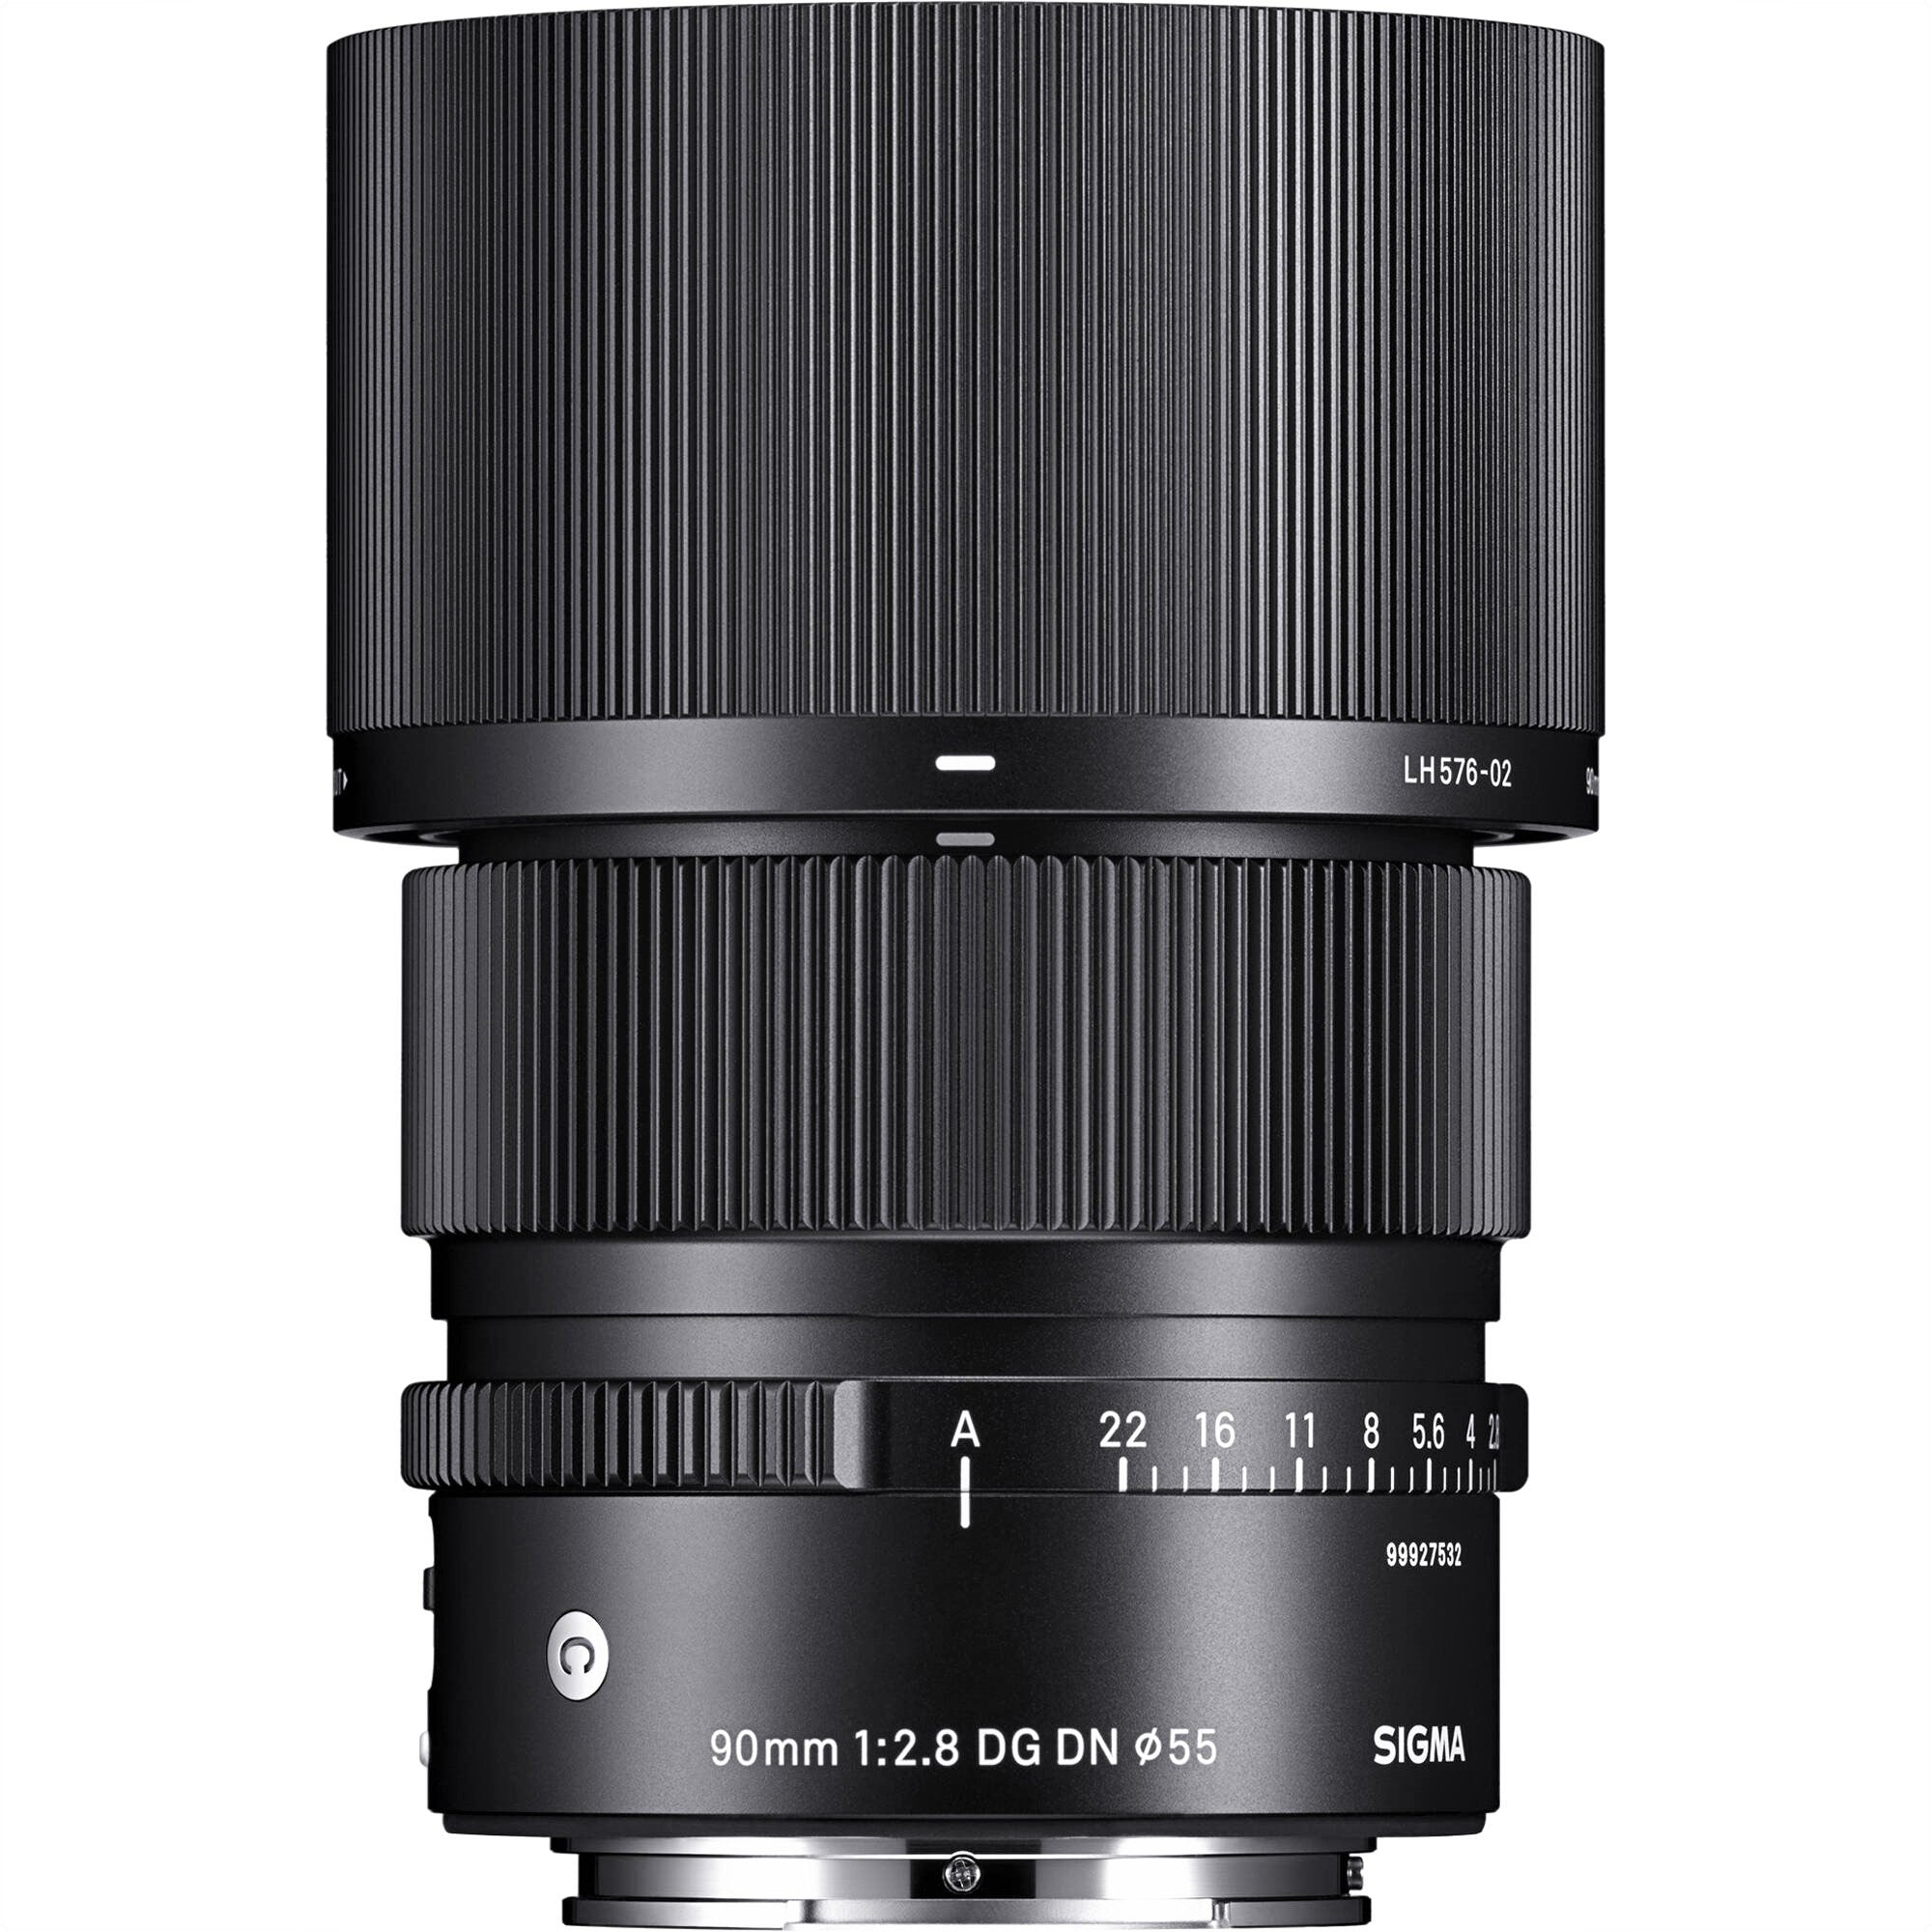 Sigma 90mm F2.8 DG DN Contemporary Lens for Sony E with Attached Lens Hood on the Top